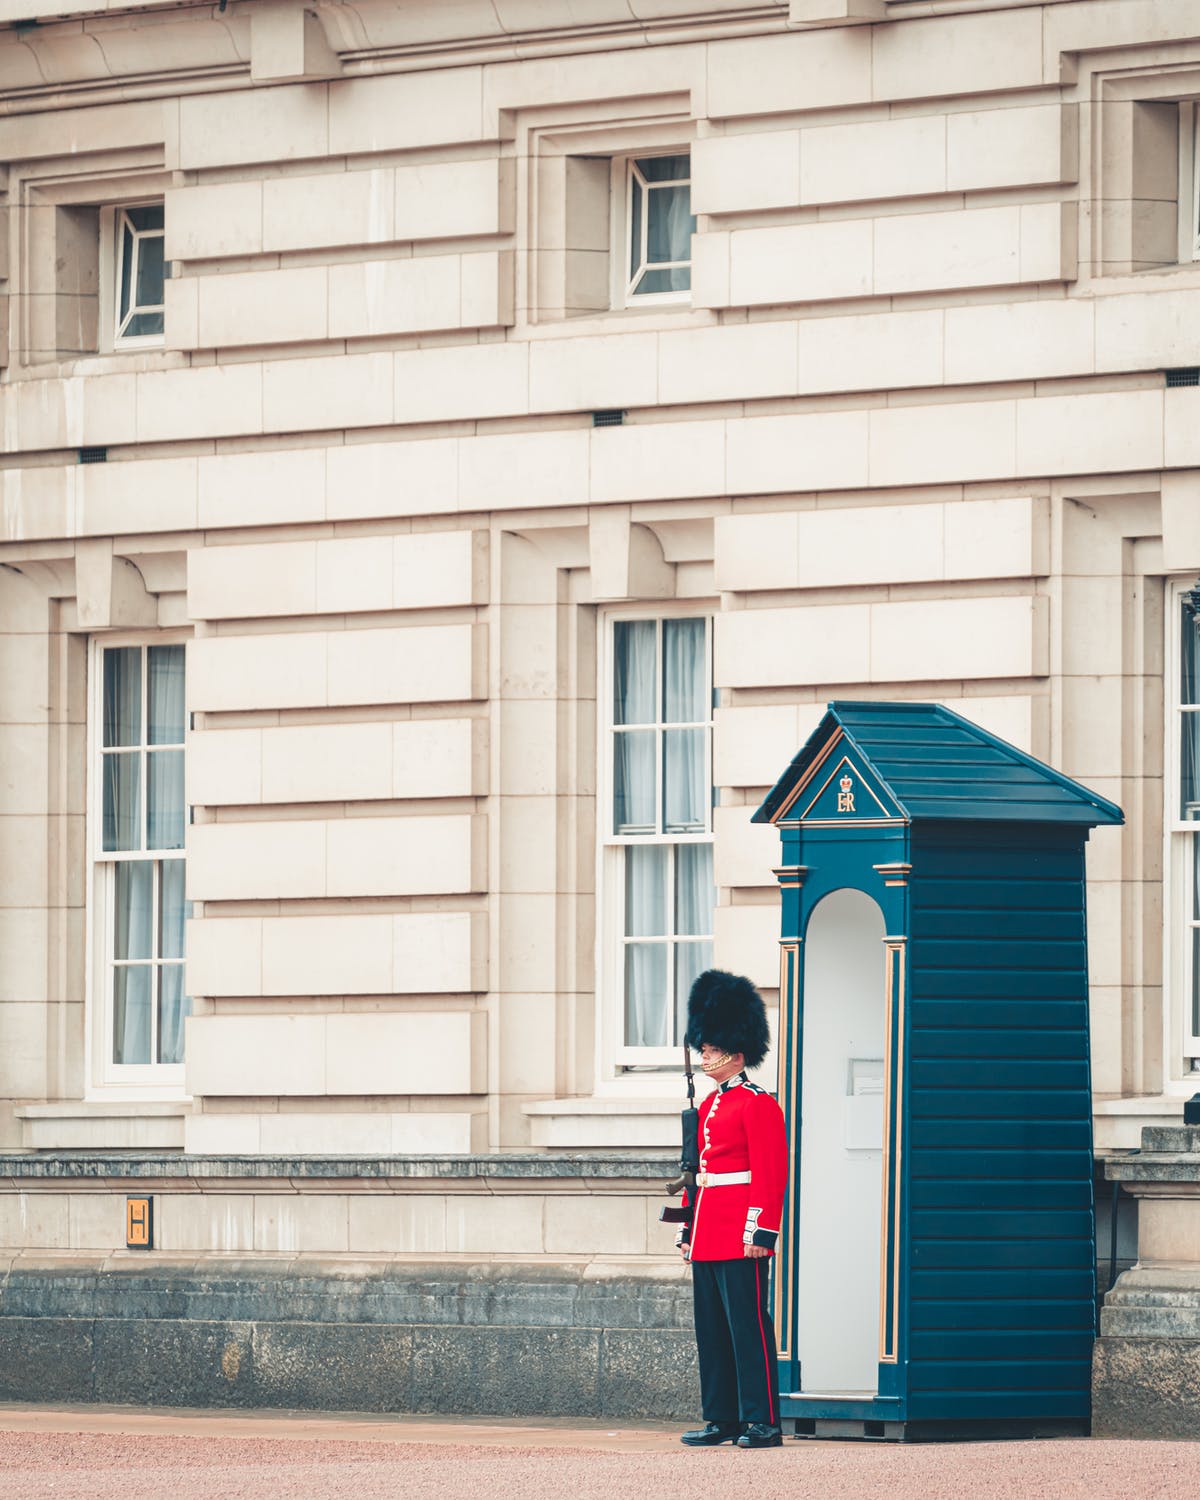 Guard wondering who inherits from Prince Philip